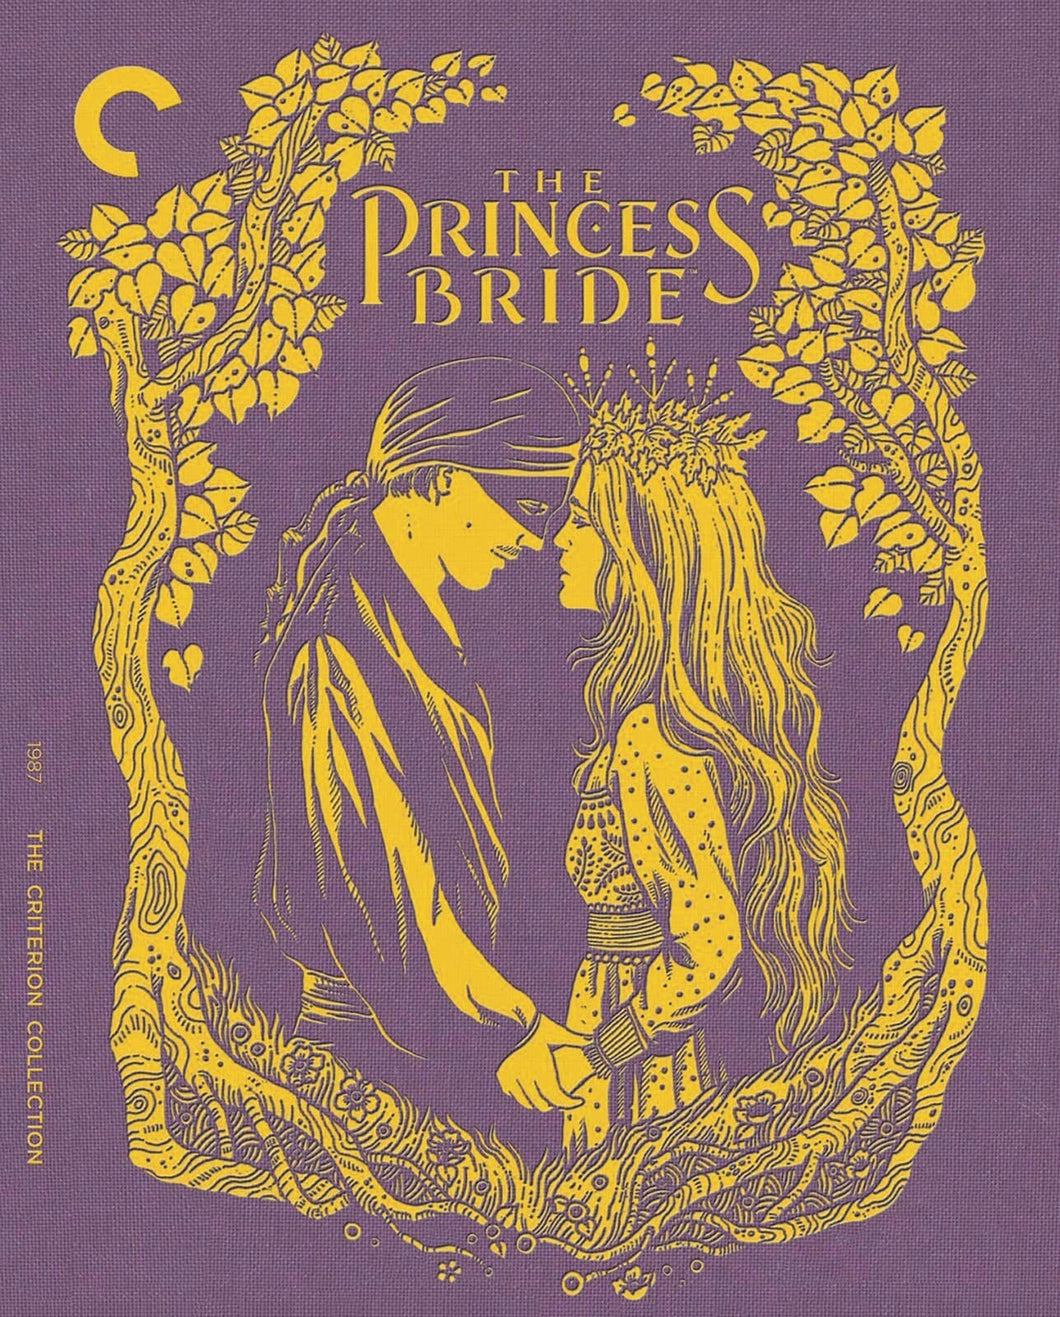 The Princess Bride 4K (1987) - front cover